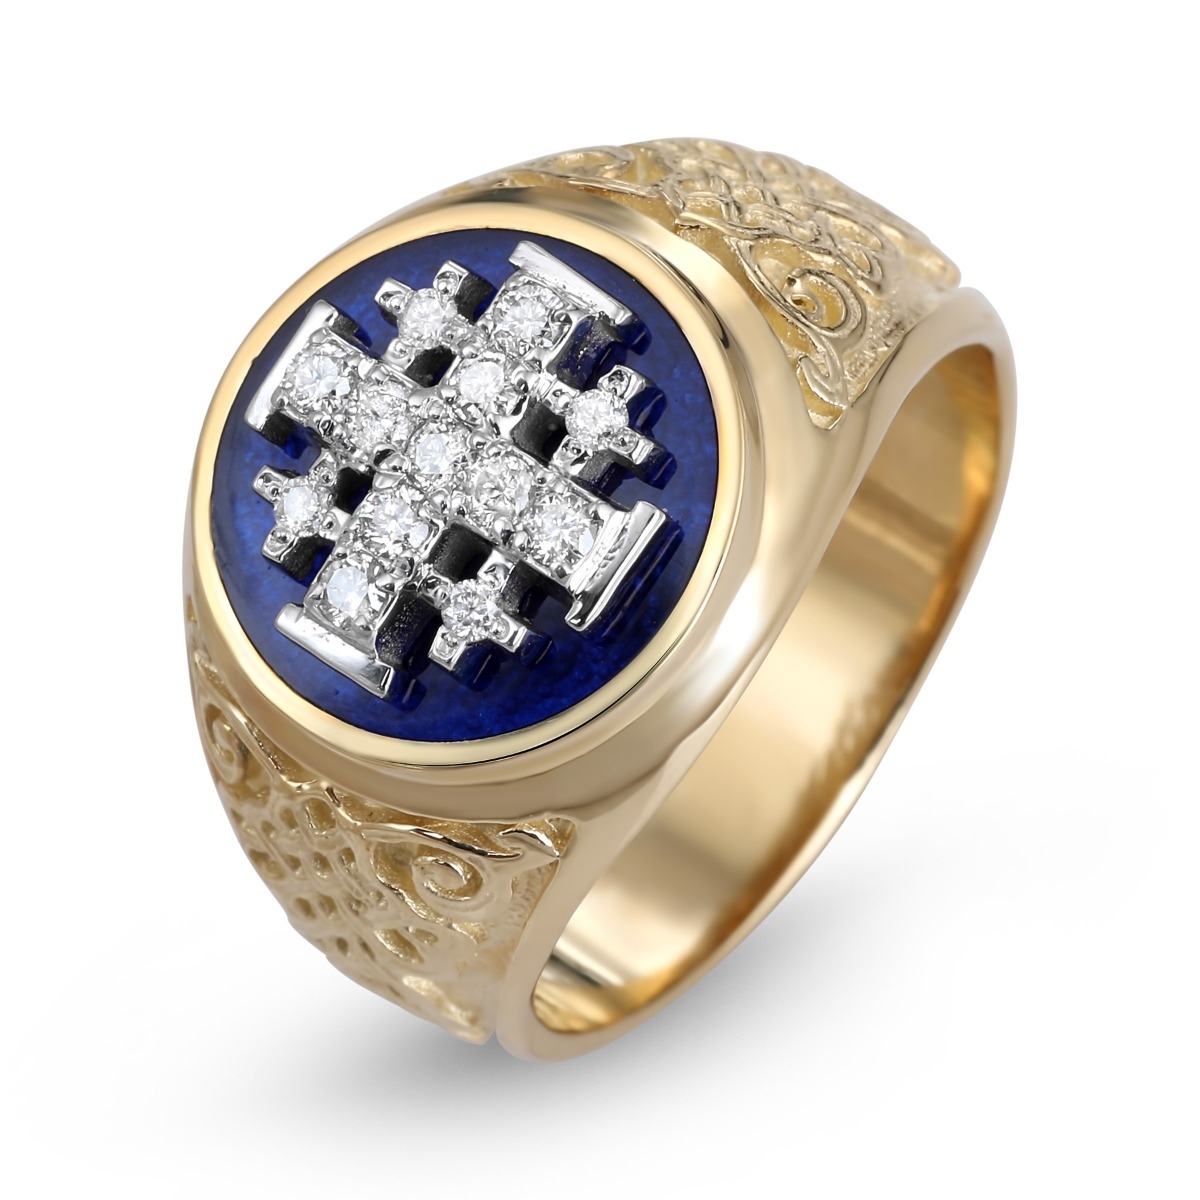 Anbinder Jewelry 14K Yellow Gold Enamel and Diamond Men’s Jerusalem Cross Ecclesiastical Signet Ring with Celtic Knots - 1